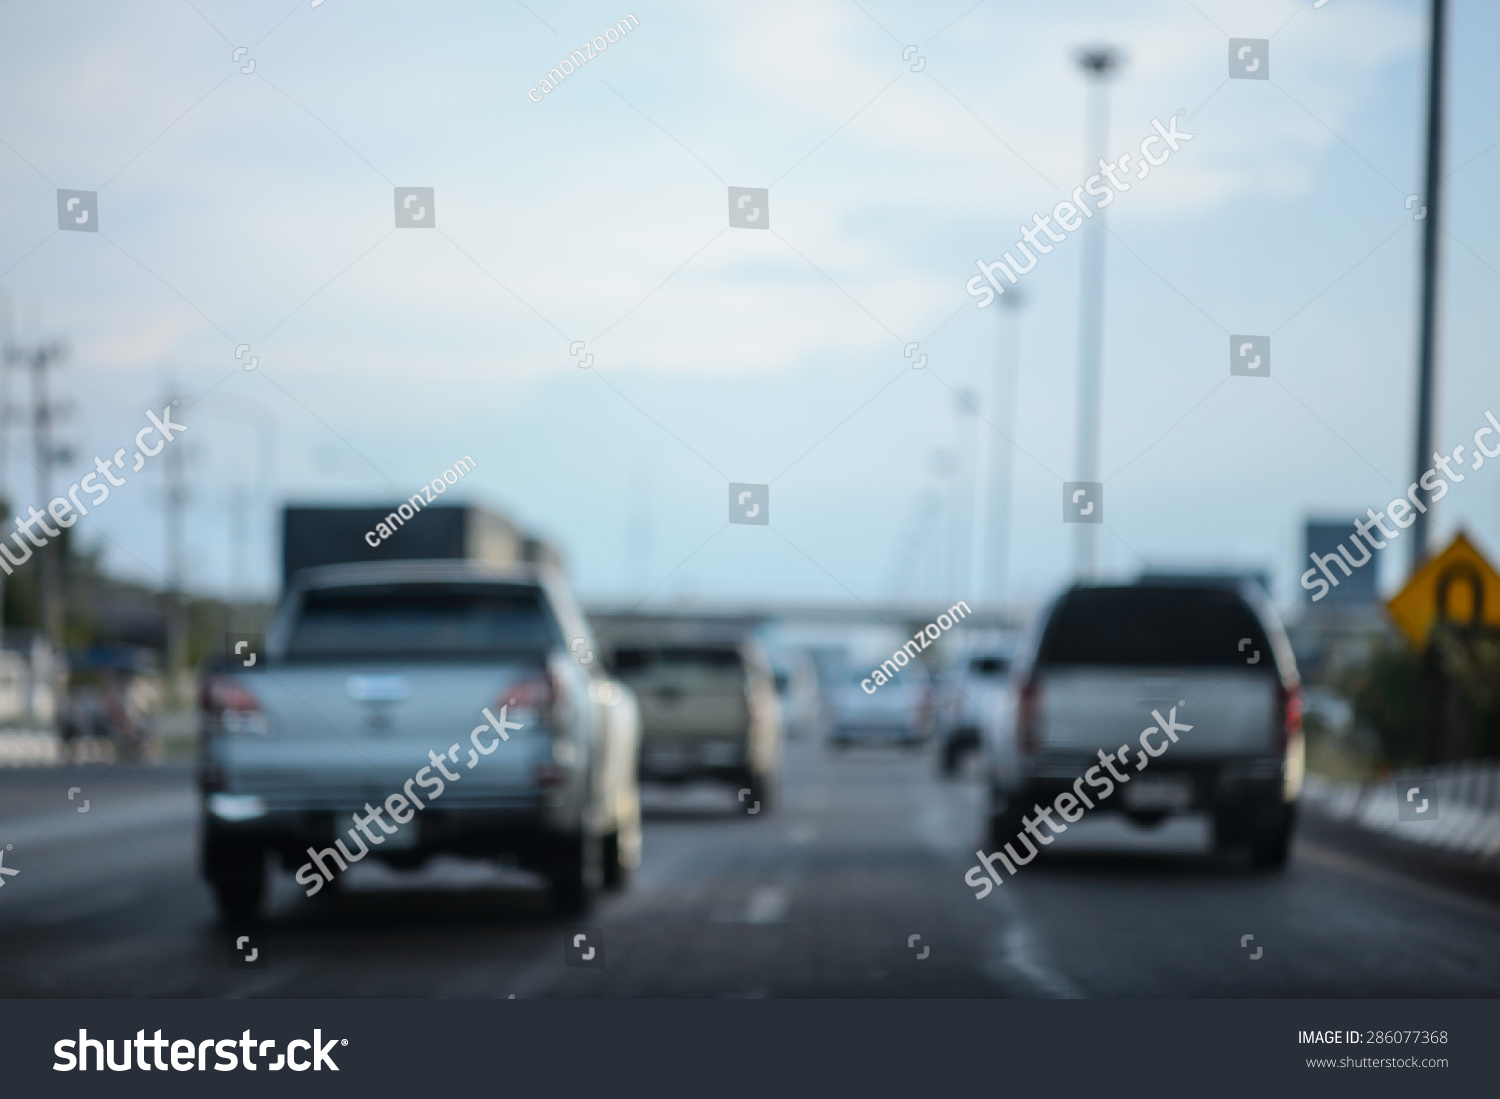 Abstract urban background with blurred traffic on street #286077368